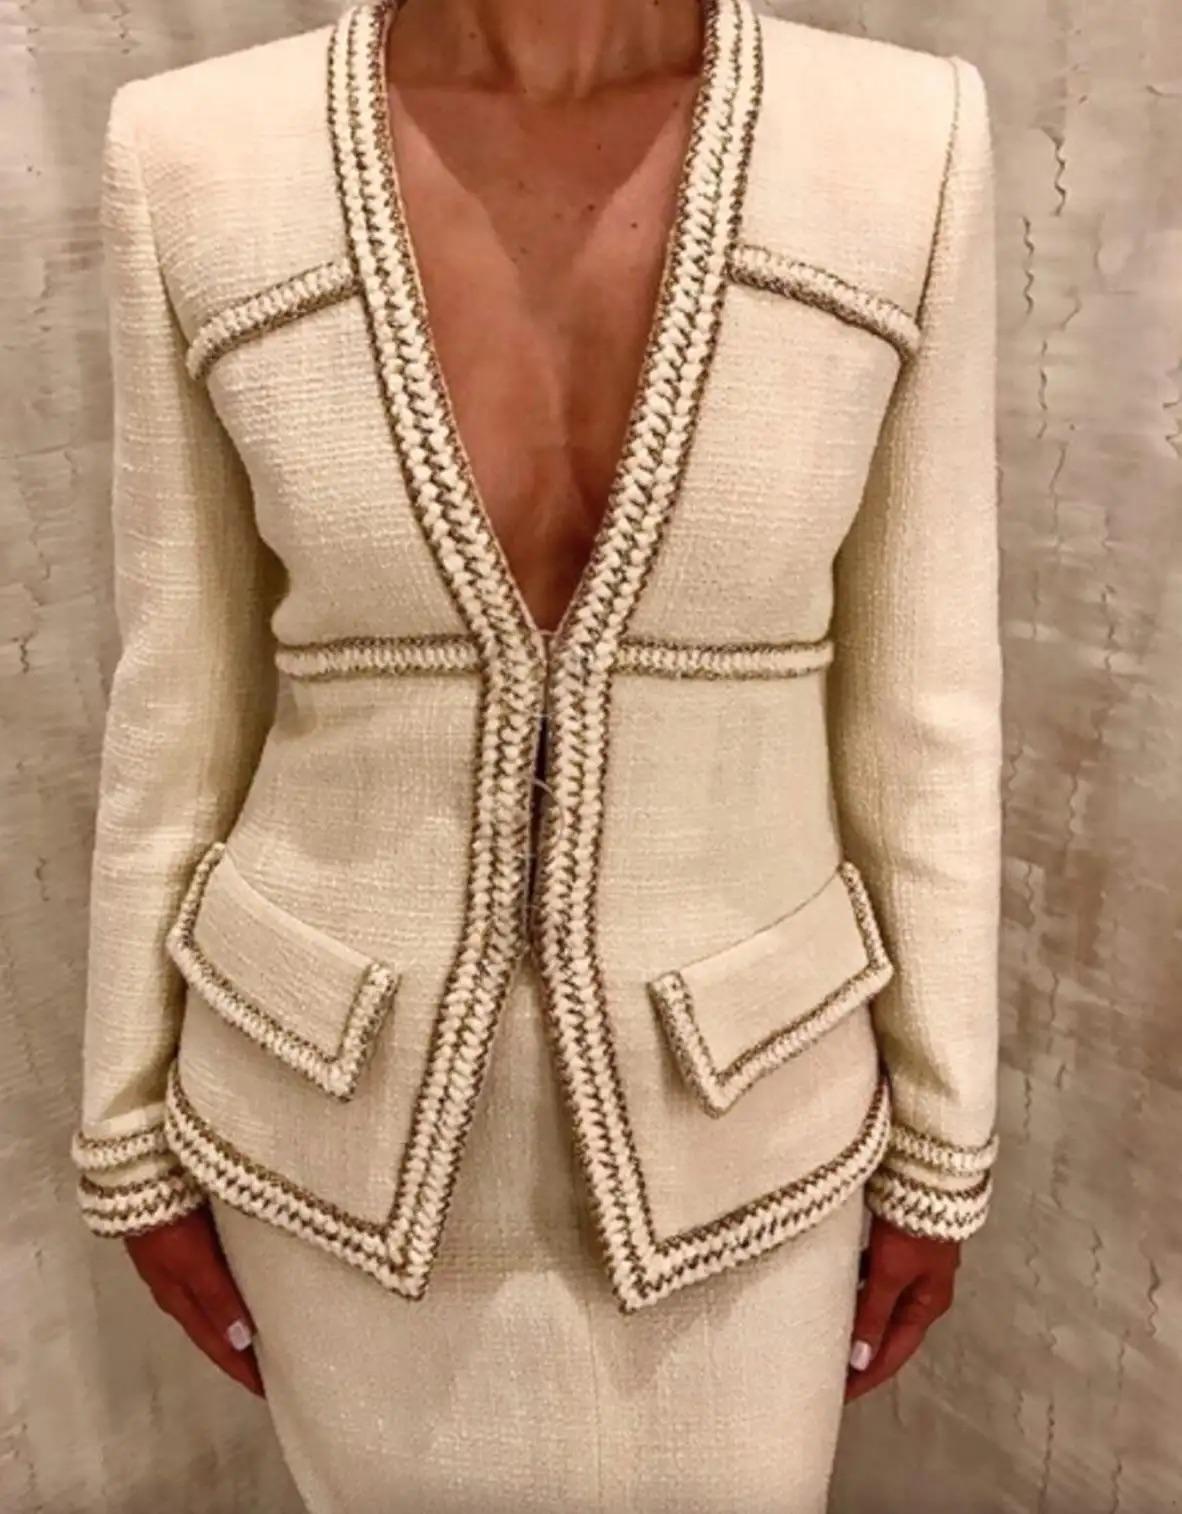 Chanel Pre-Fall 2017 Metiers D'Art Ritz 17A Ecru Cream Jacket Skirt Suit In Good Condition For Sale In Jersey City, NJ